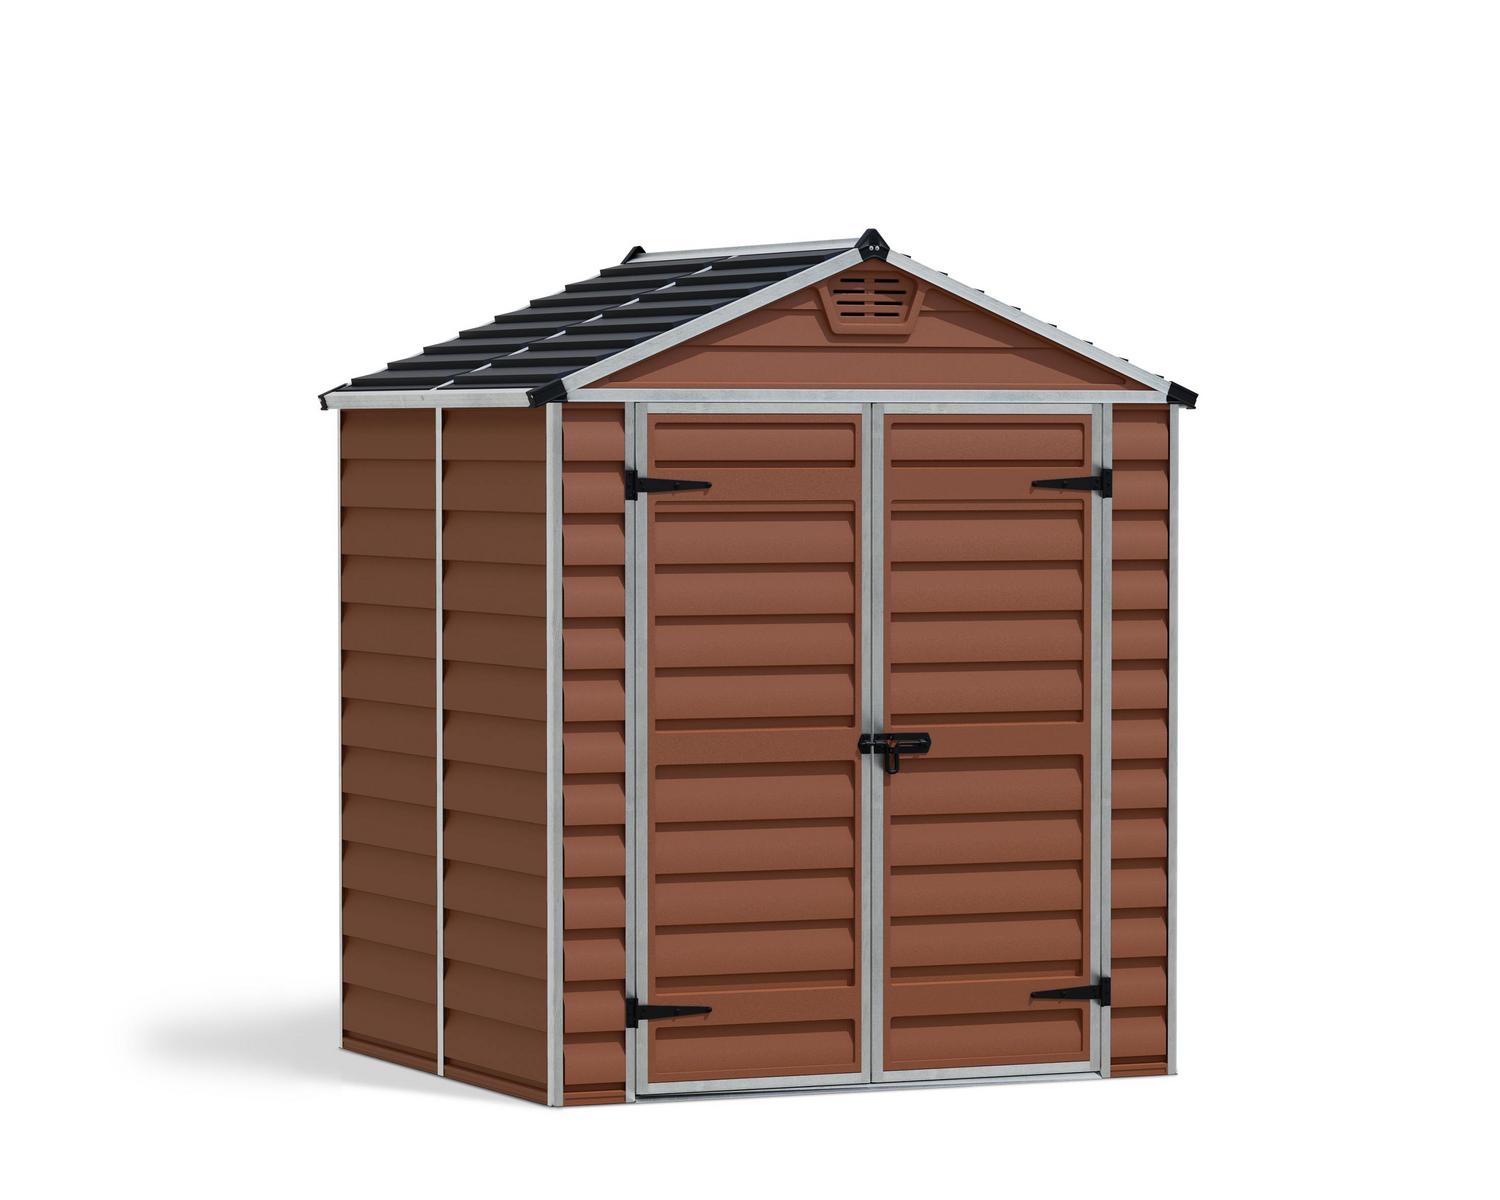 Storage Shed Kit Skylight 6 ft. x 5 ft. Amber Structure